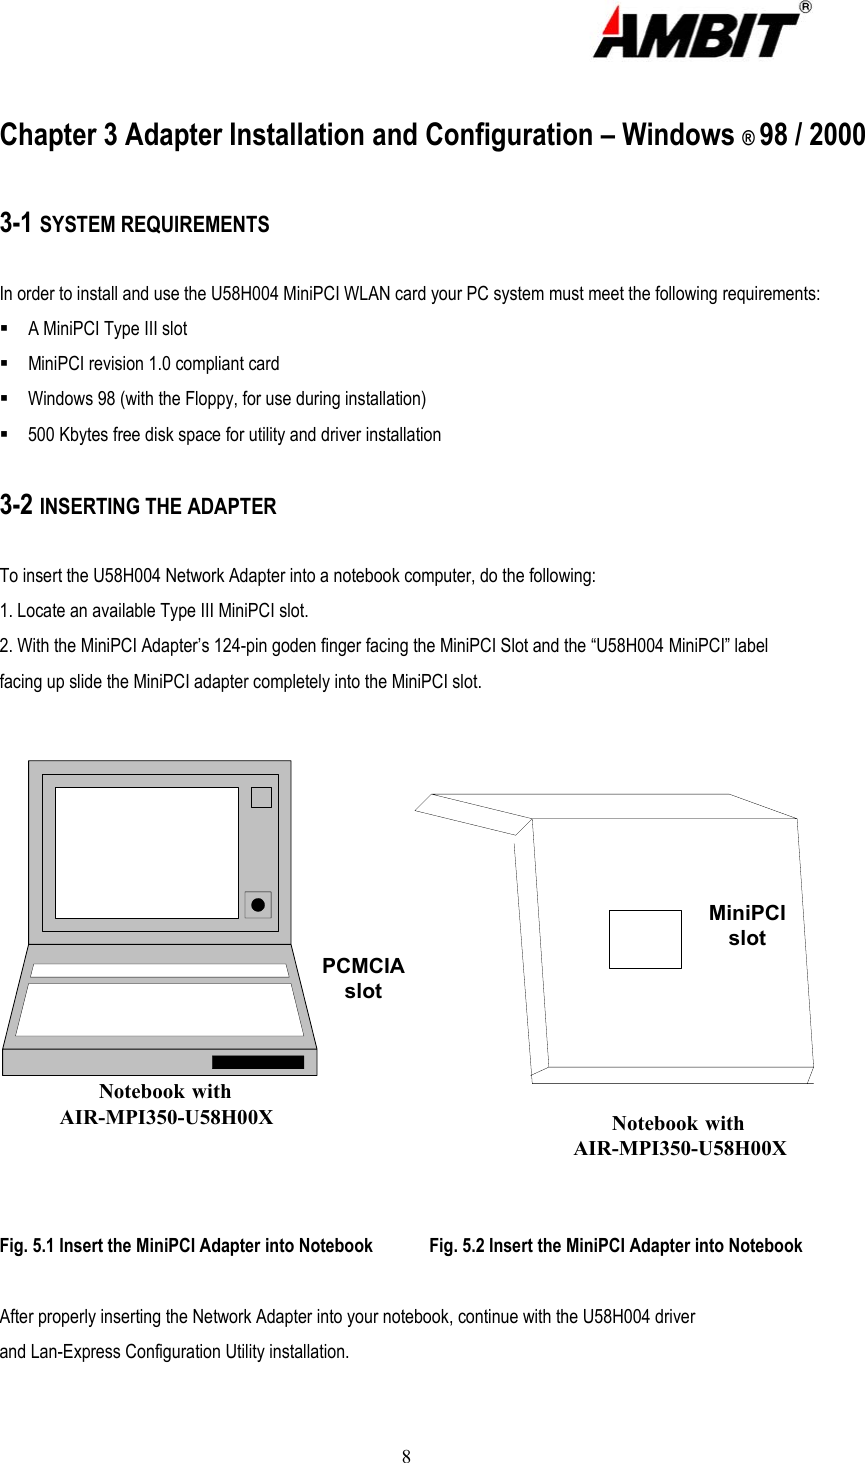  8  Chapter 3 Adapter Installation and Configuration – Windows ® 98 / 2000  3-1 SYSTEM REQUIREMENTS  In order to install and use the U58H004 MiniPCI WLAN card your PC system must meet the following requirements:  A MiniPCI Type III slot  MiniPCI revision 1.0 compliant card    Windows 98 (with the Floppy, for use during installation)  500 Kbytes free disk space for utility and driver installation  3-2 INSERTING THE ADAPTER  To insert the U58H004 Network Adapter into a notebook computer, do the following: 1. Locate an available Type III MiniPCI slot. 2. With the MiniPCI Adapter’s 124-pin goden finger facing the MiniPCI Slot and the “U58H004 MiniPCI” label facing up slide the MiniPCI adapter completely into the MiniPCI slot.  Notebook withAIR-MPI350-U58H00XPCMCIAslotMiniPCIslotNotebook withAIR-MPI350-U58H00X Fig. 5.1 Insert the MiniPCI Adapter into Notebook            Fig. 5.2 Insert the MiniPCI Adapter into Notebook  After properly inserting the Network Adapter into your notebook, continue with the U58H004 driver and Lan-Express Configuration Utility installation.  